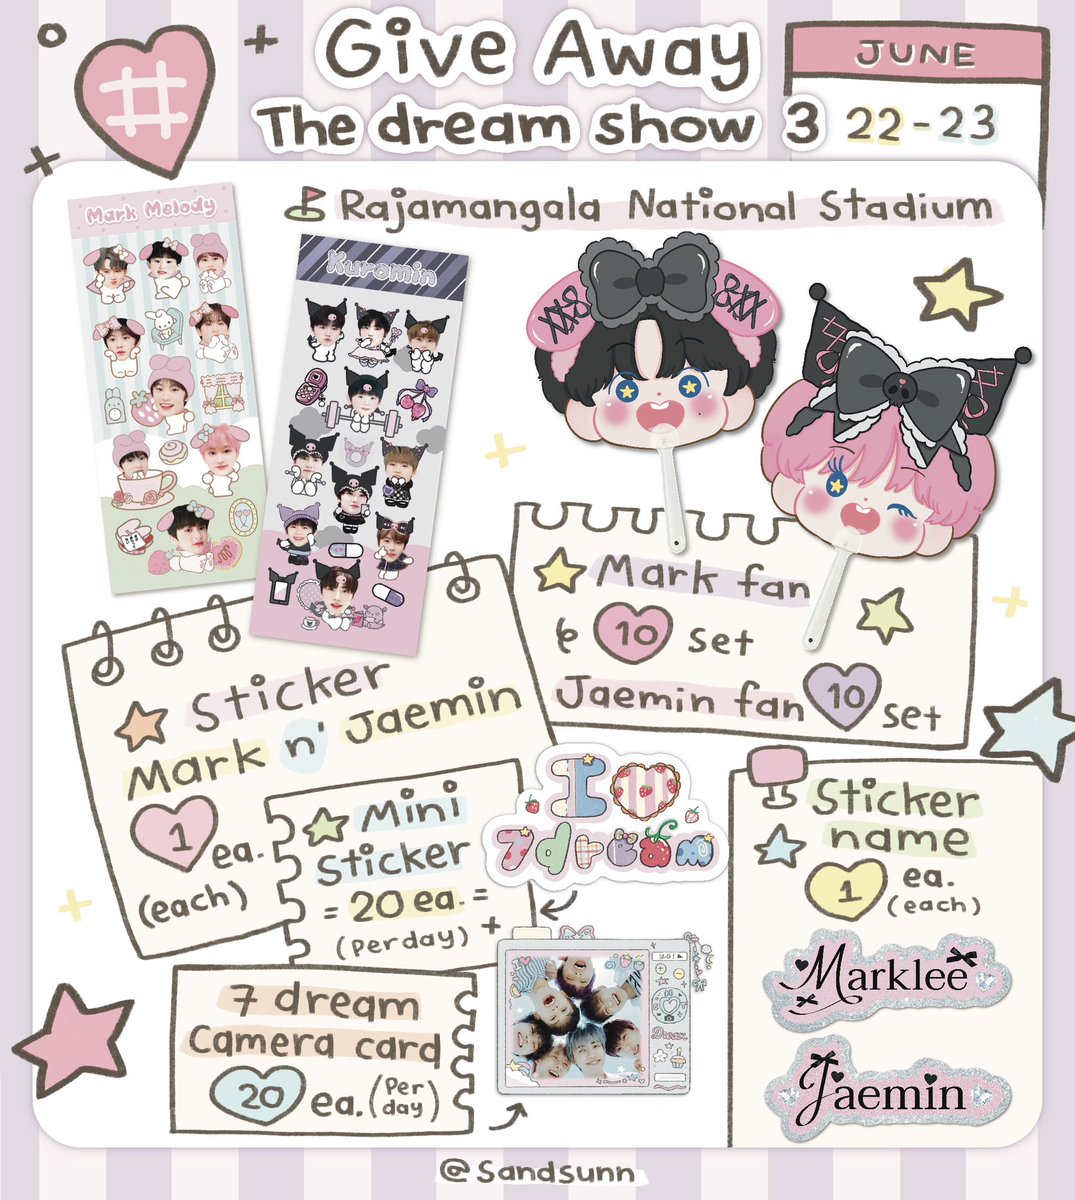 𓇼 𓂂𓏸 pls kindly rt  (random 1 set)

give away dream show 3 bkk ❤︎

♡ mark melody
♡ kuromin

1 set / 1 person

★ date : 22 - 23 june
★ time : tbd
★ location: rajamangala stadium

💭 rt & show this tweet

#NCTDREAM_THEDREAMSHOW3inBKK
#NCTDREAM_THEDREAMSHOW3_in_BKK